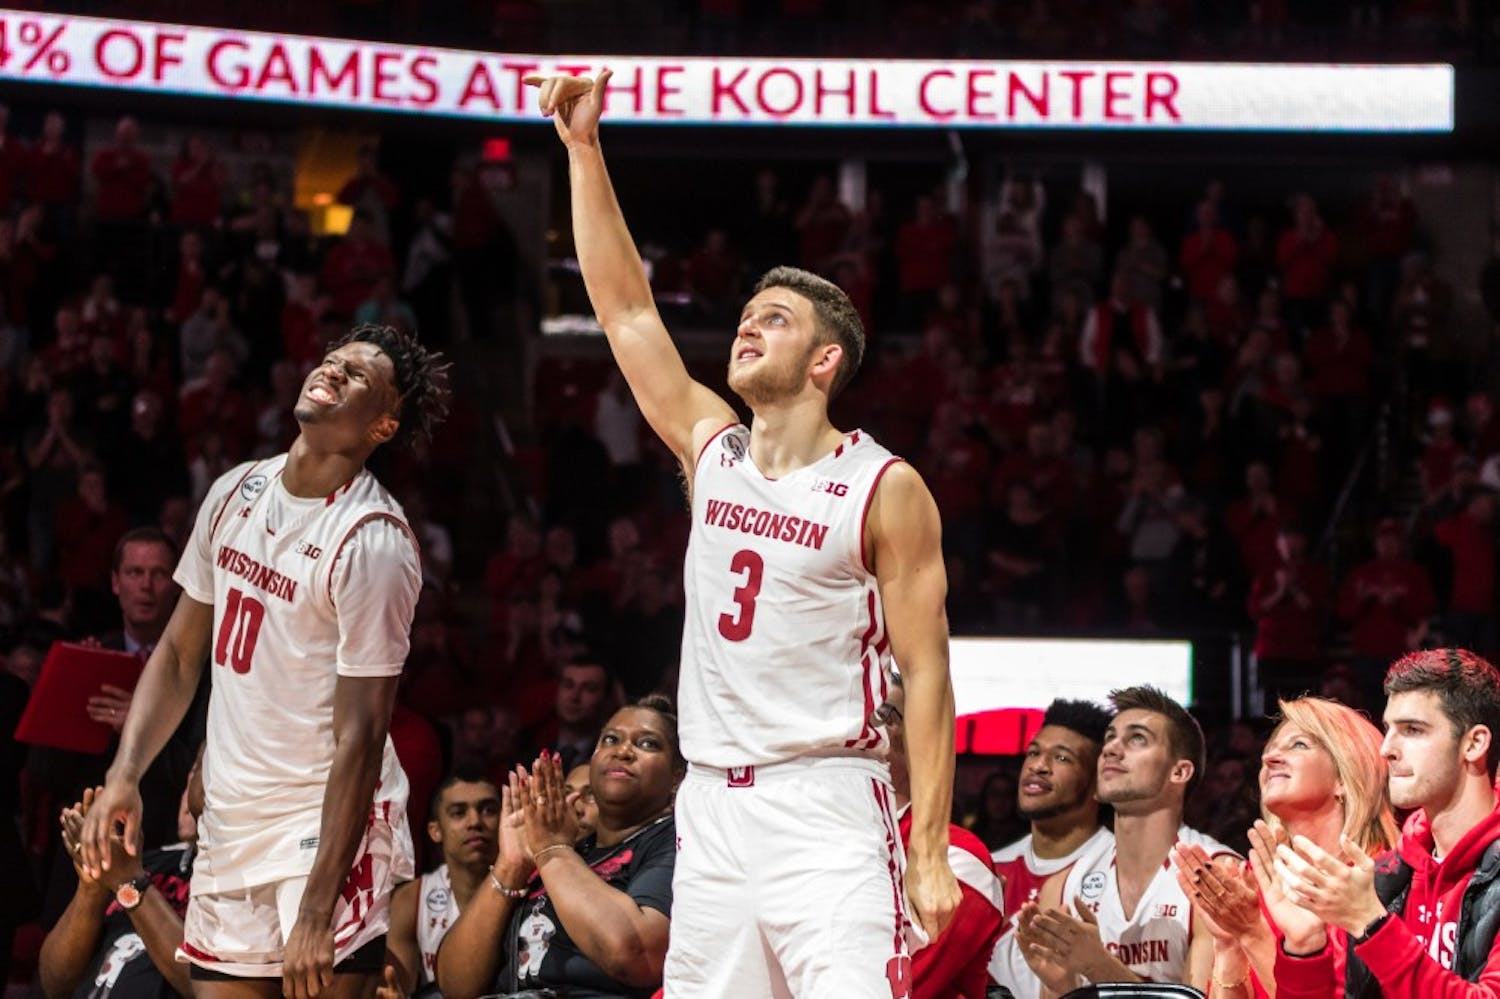 Gallery: Seniors lead Badgers to key victory in last appearance on Kohl Center floor